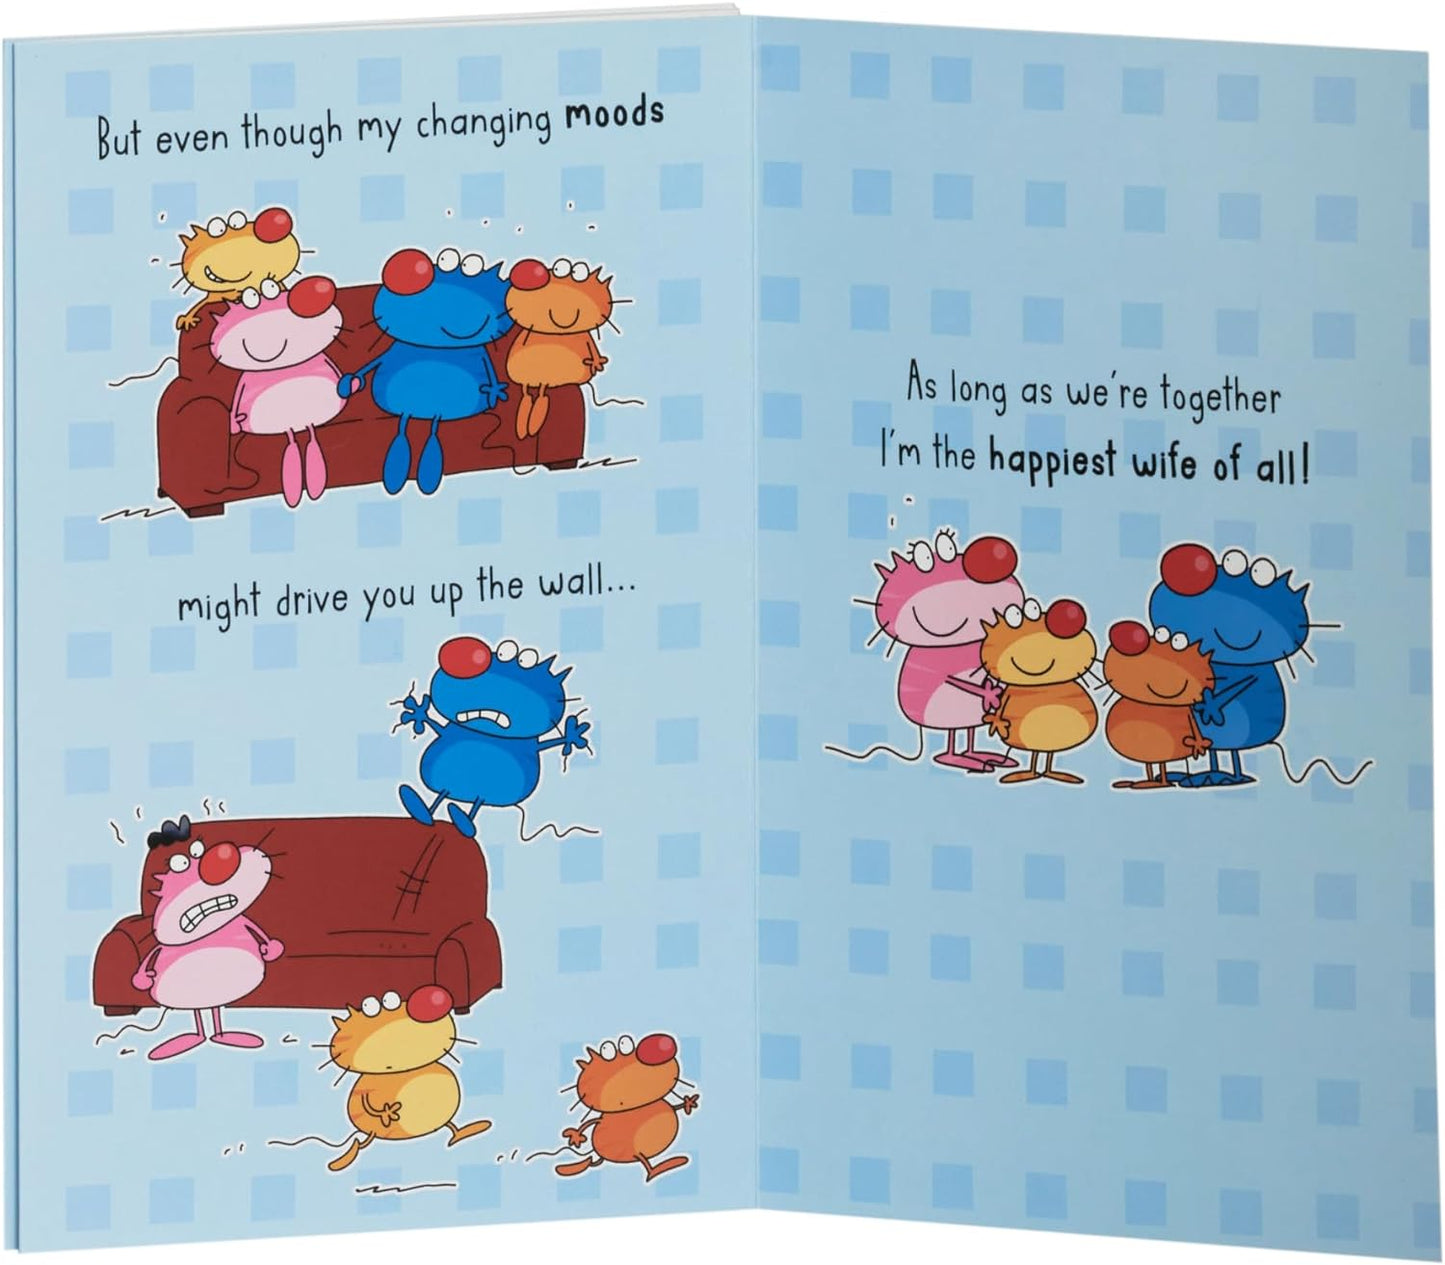 Funny Cartoon Design Husband Father's Day Card